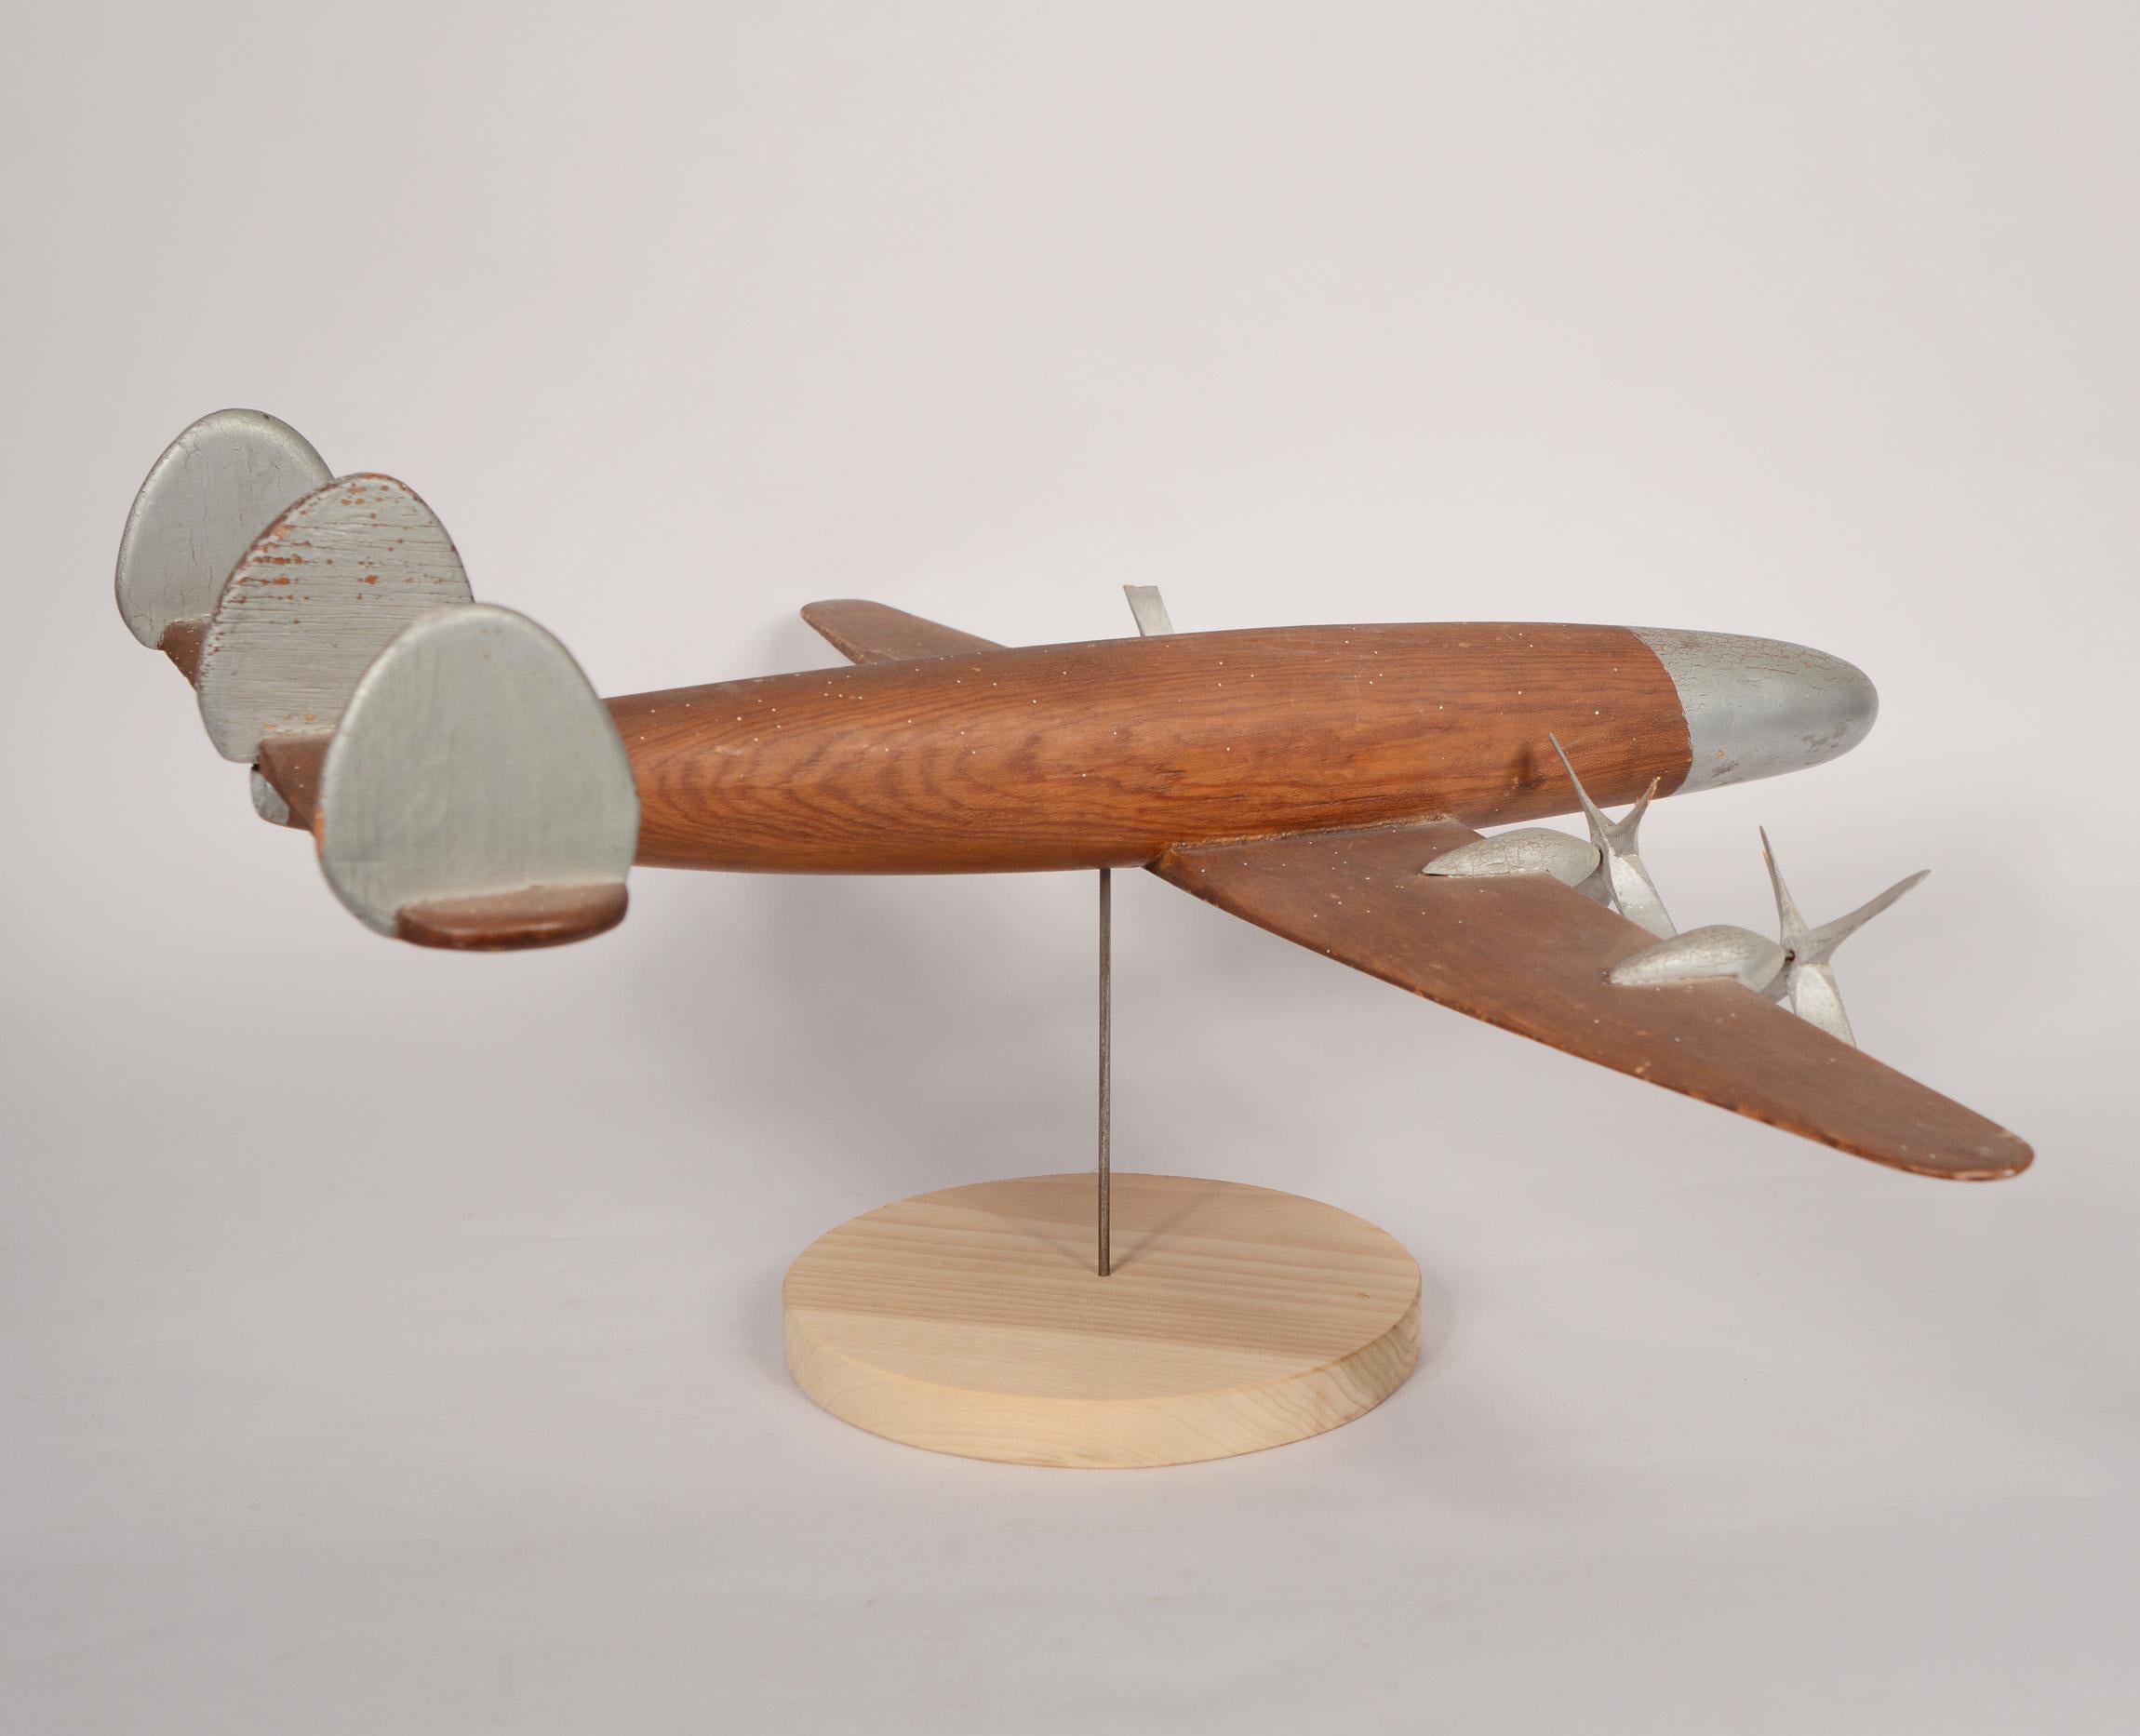 Wood Folk Art Model of a Lockheed Constellation Airliner For Sale